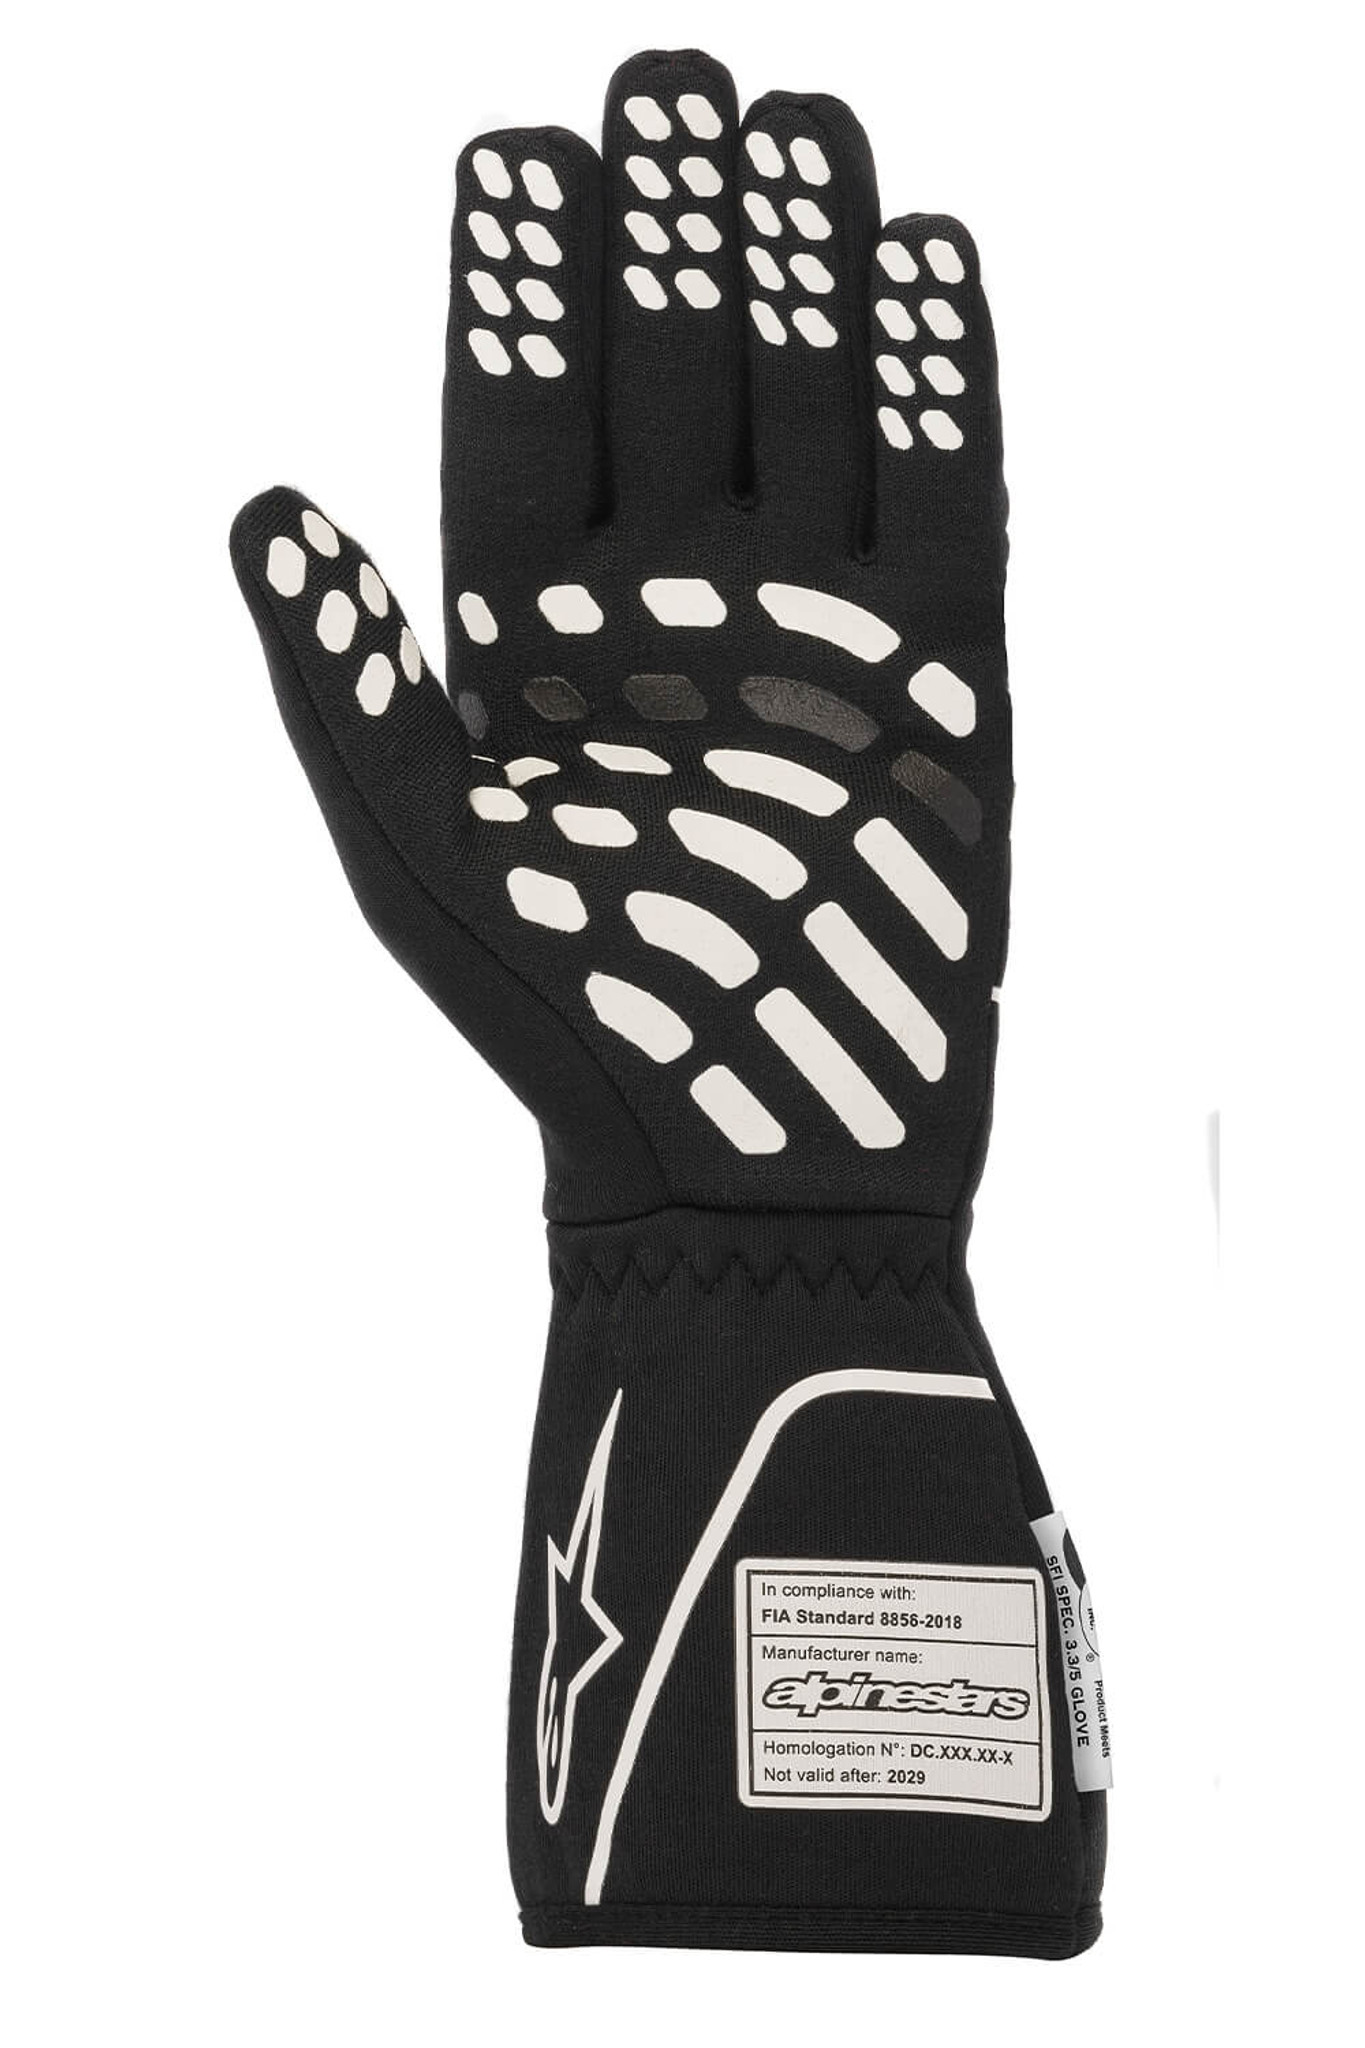 Tech-1 Race V2 Gloves Black White - Westwood Racing Supplies